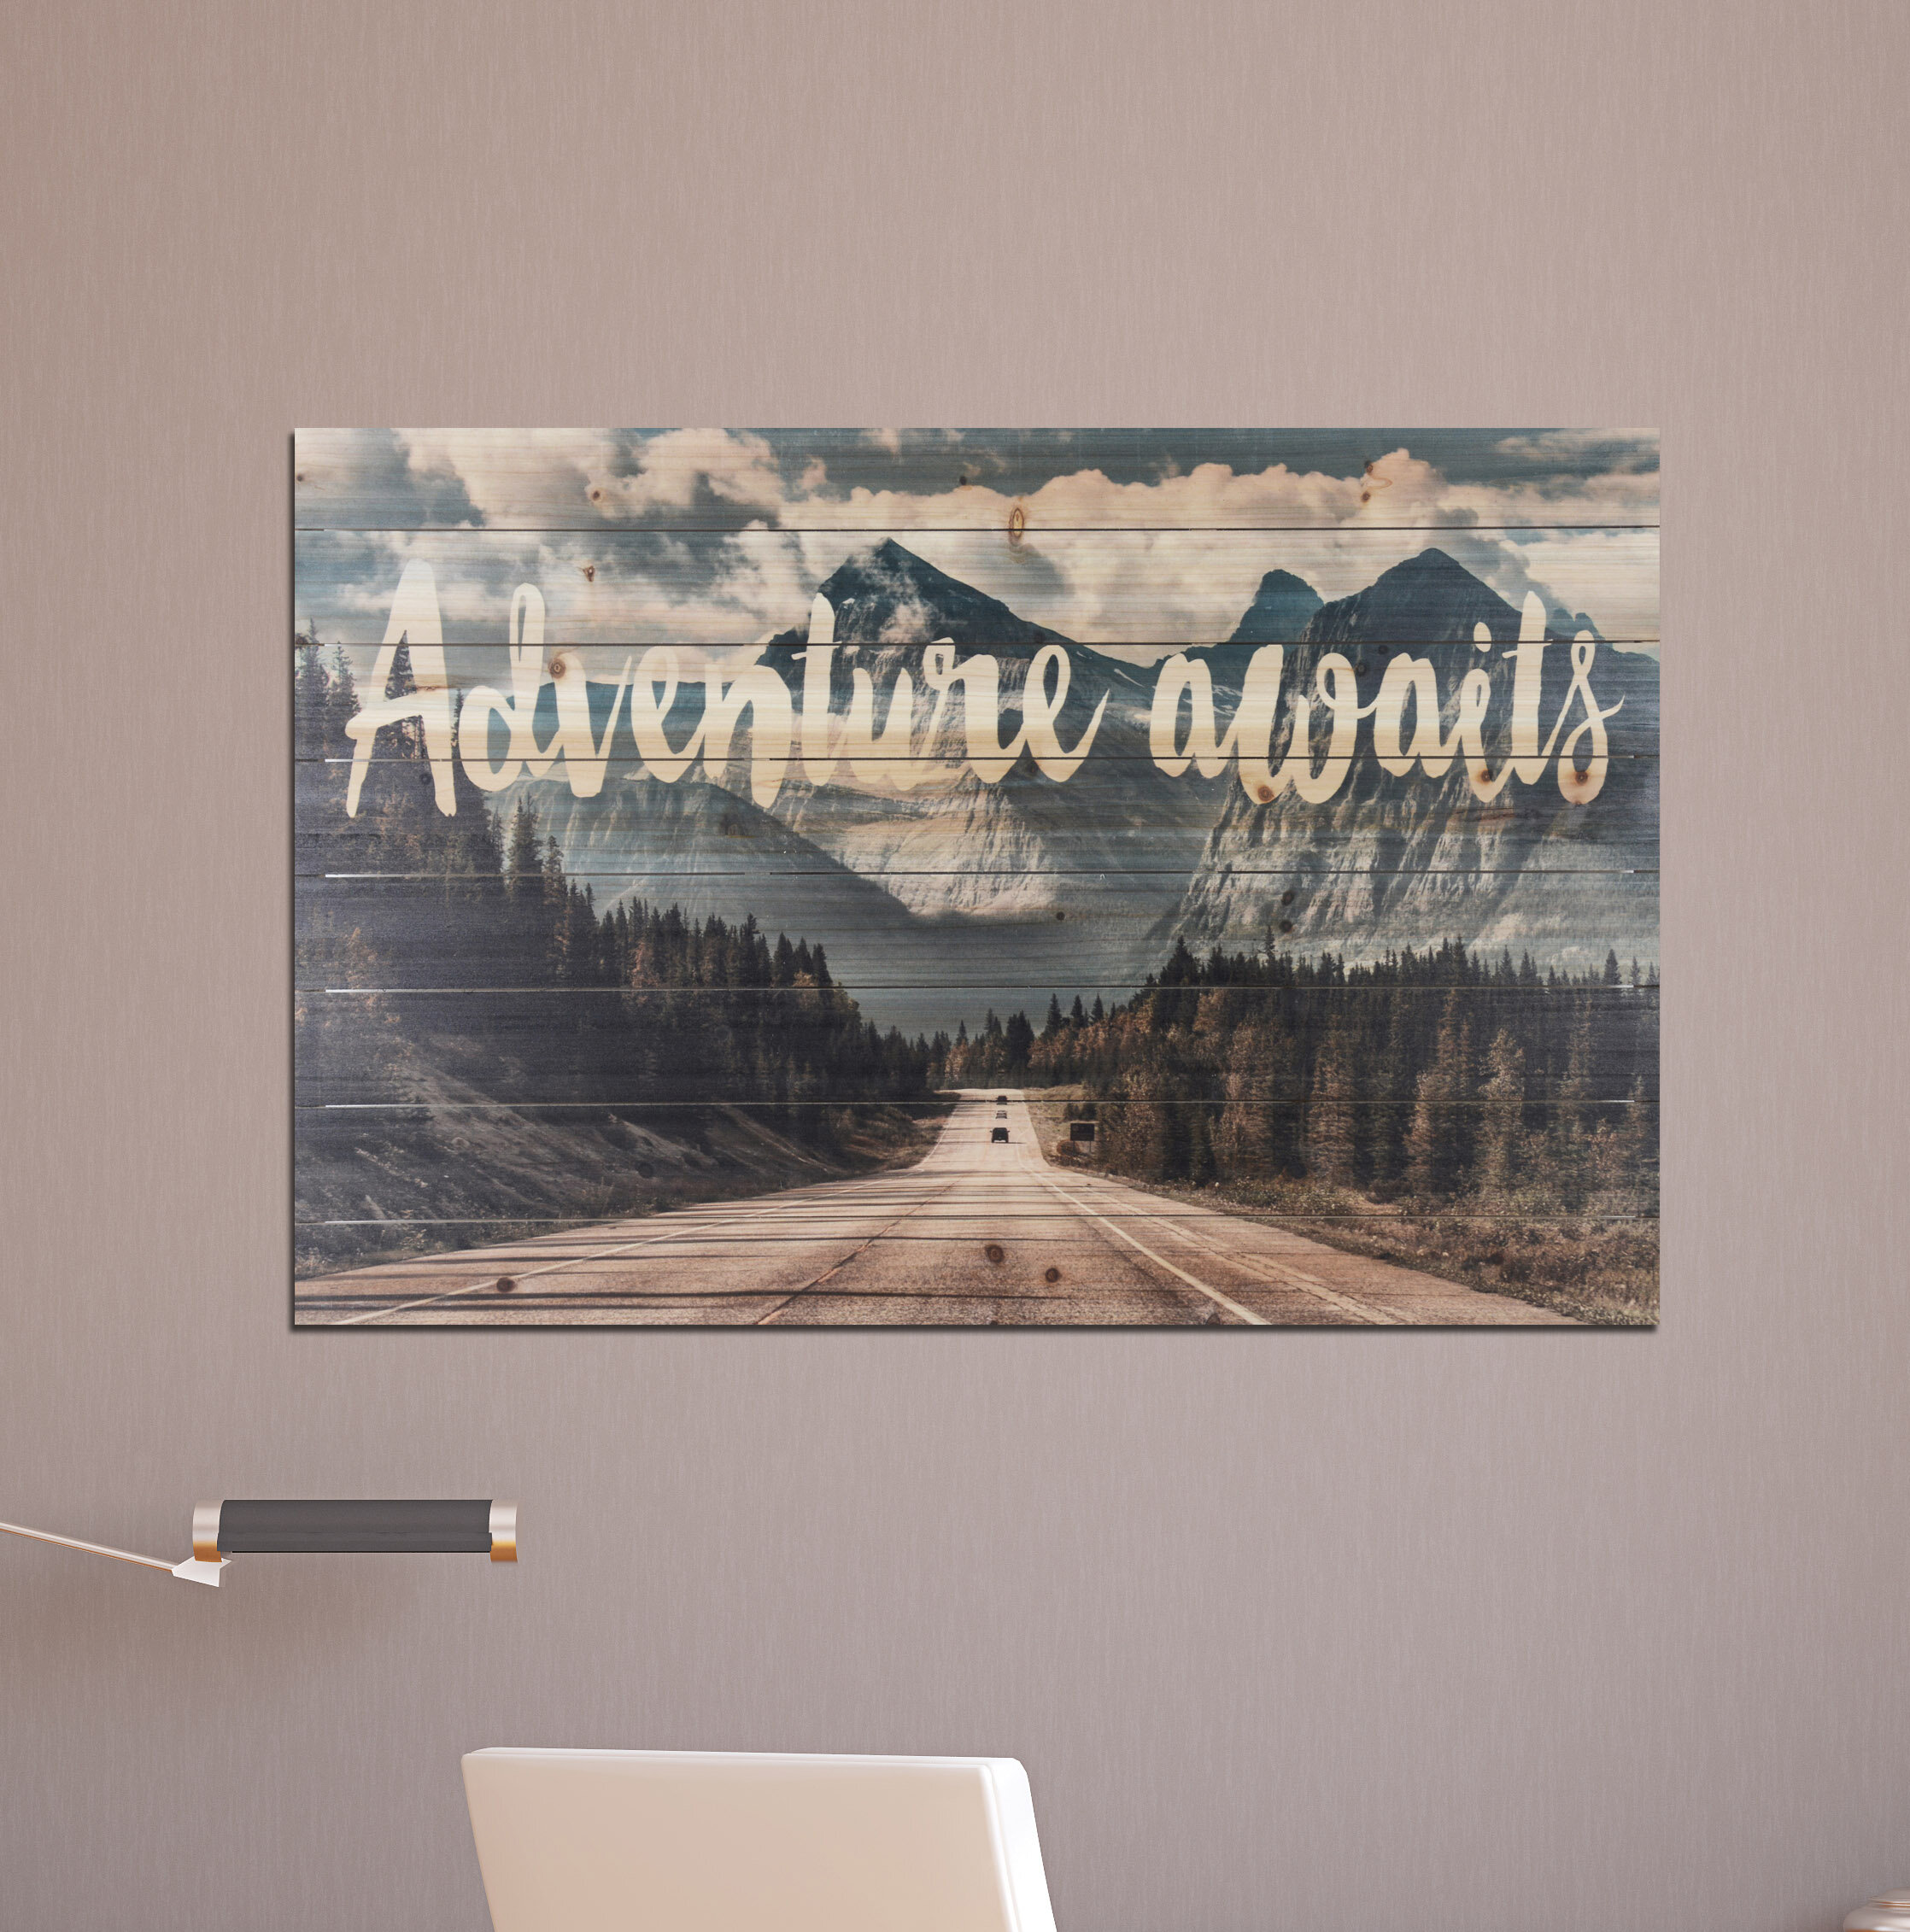 Adventure Awaits Towel for Cabin Kitchen Rustic Kitchen Gift 